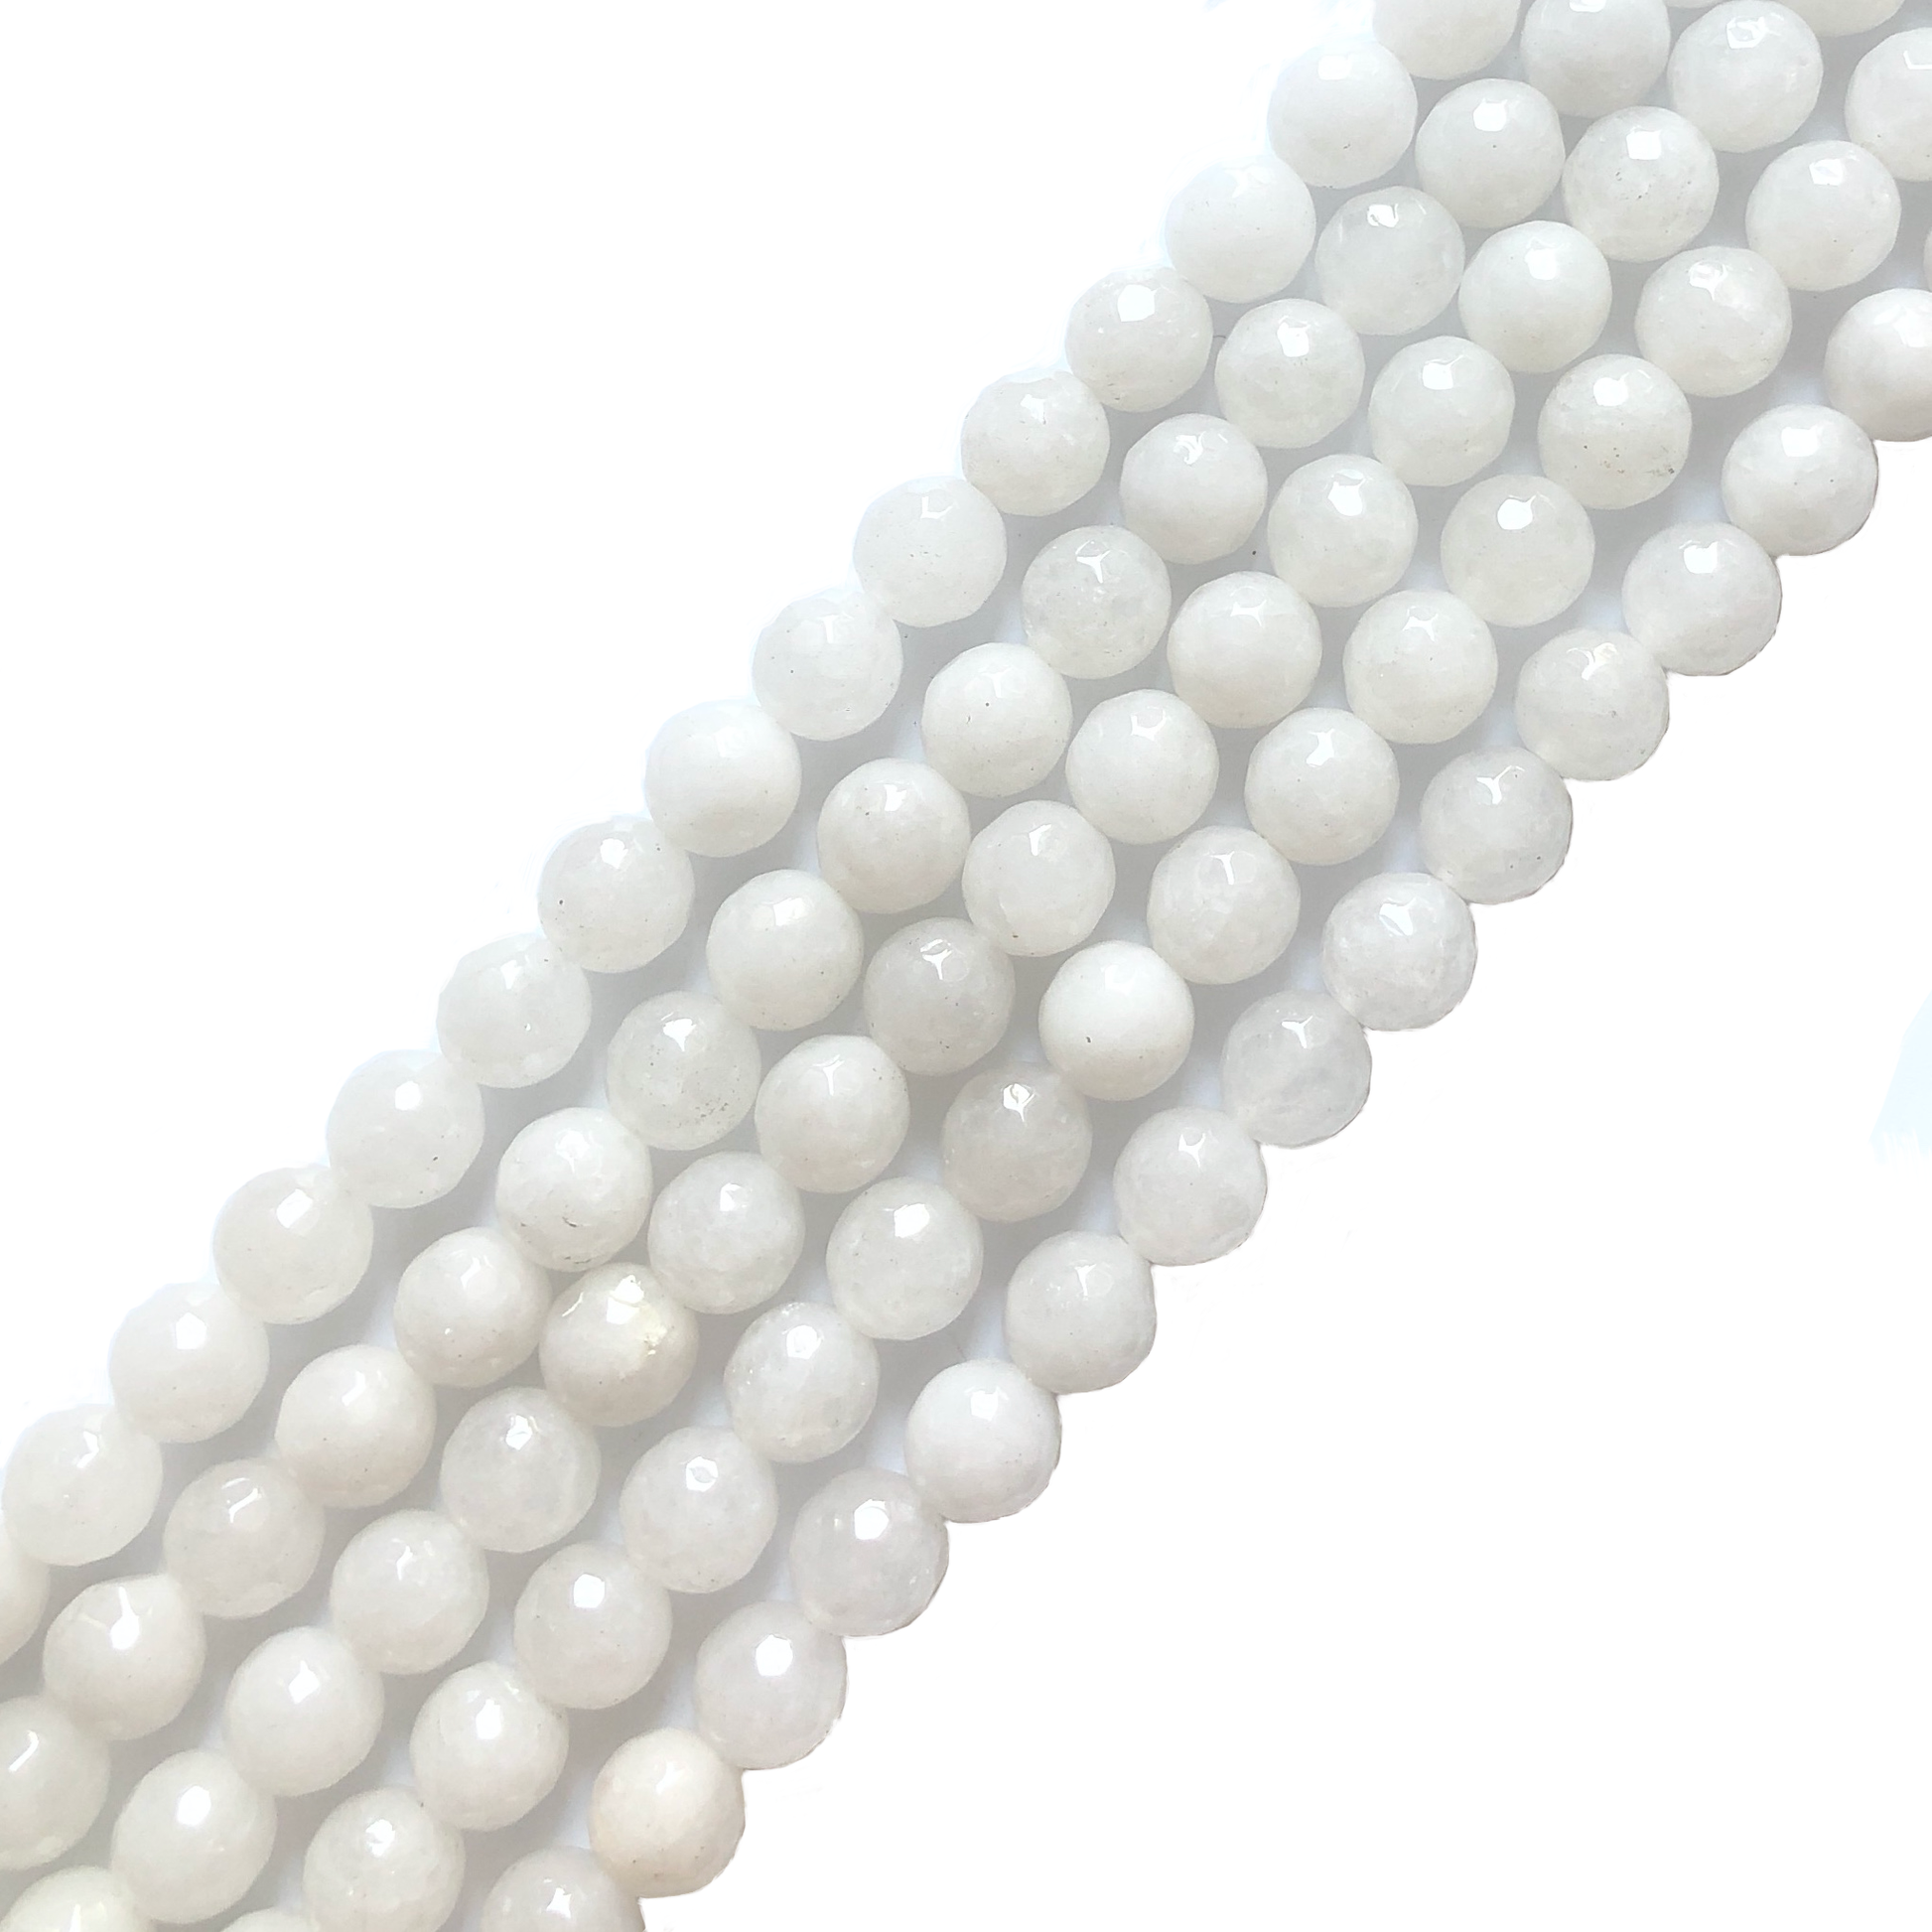 2 Strands/lot 10mm White Faceted Jade Stone Beads Stone Beads Faceted Jade Beads Charms Beads Beyond